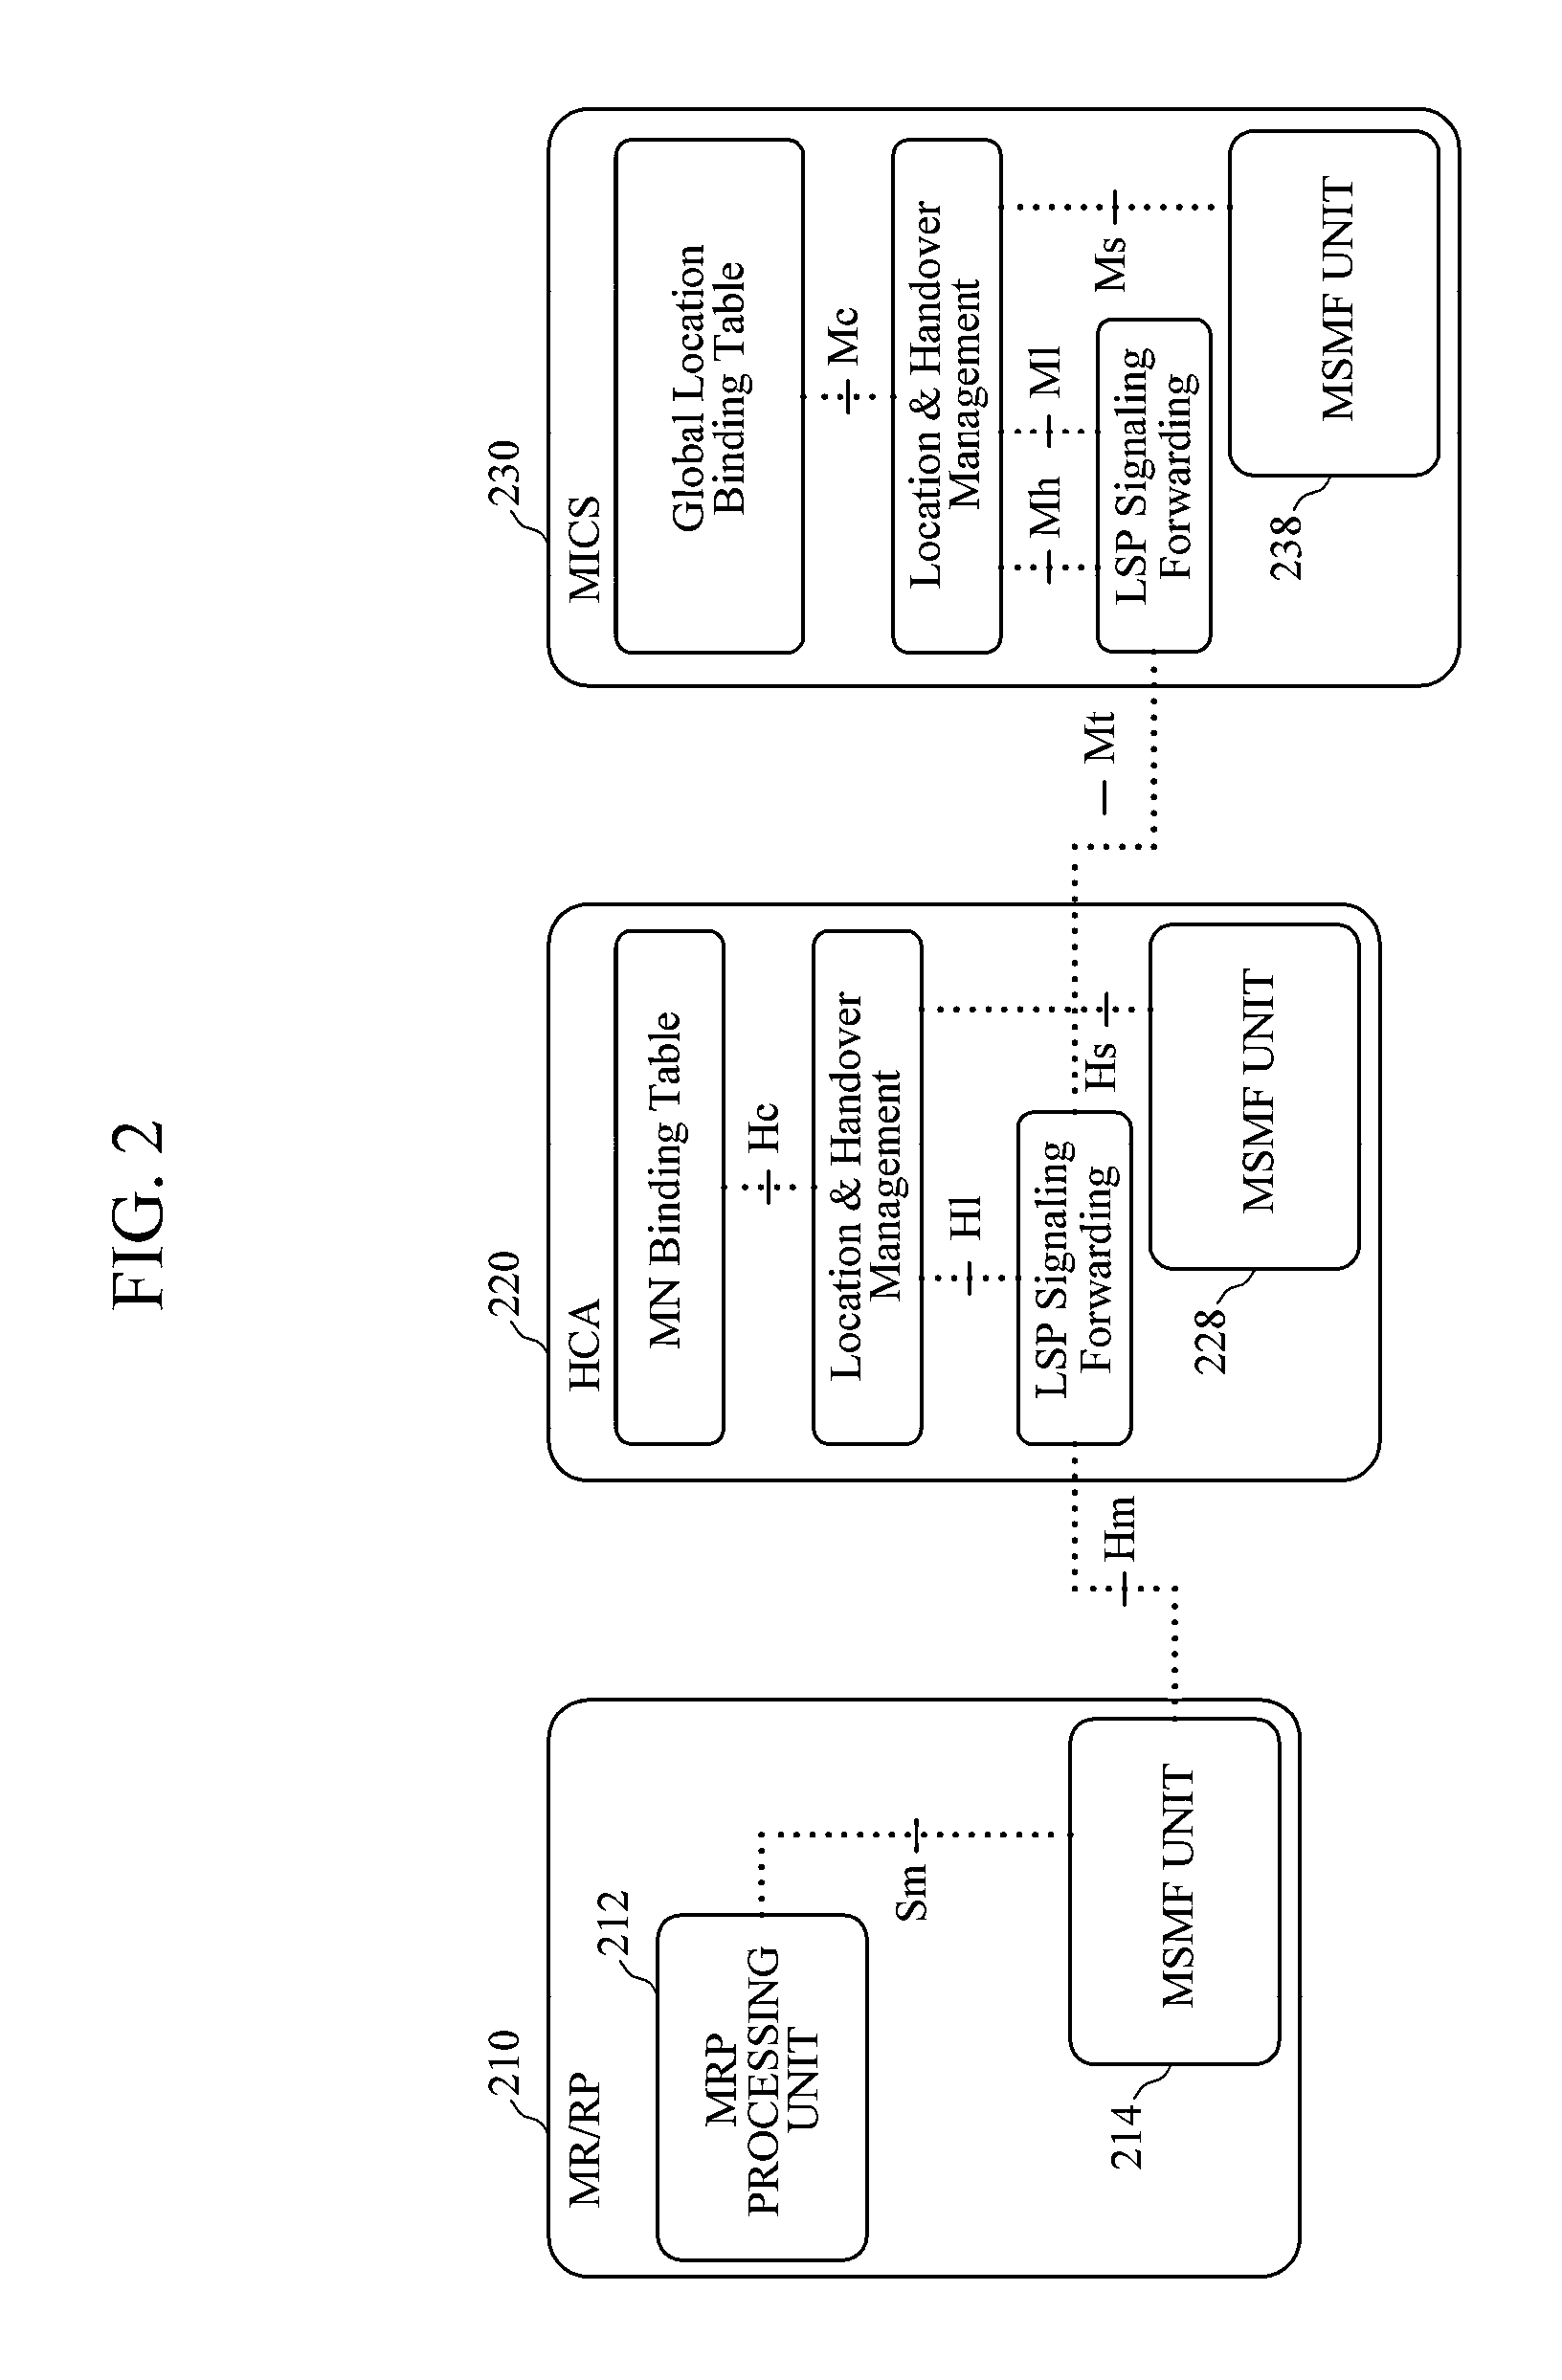 Multicast source registration method, multicast receiver joining method and multicast service providing method during handover